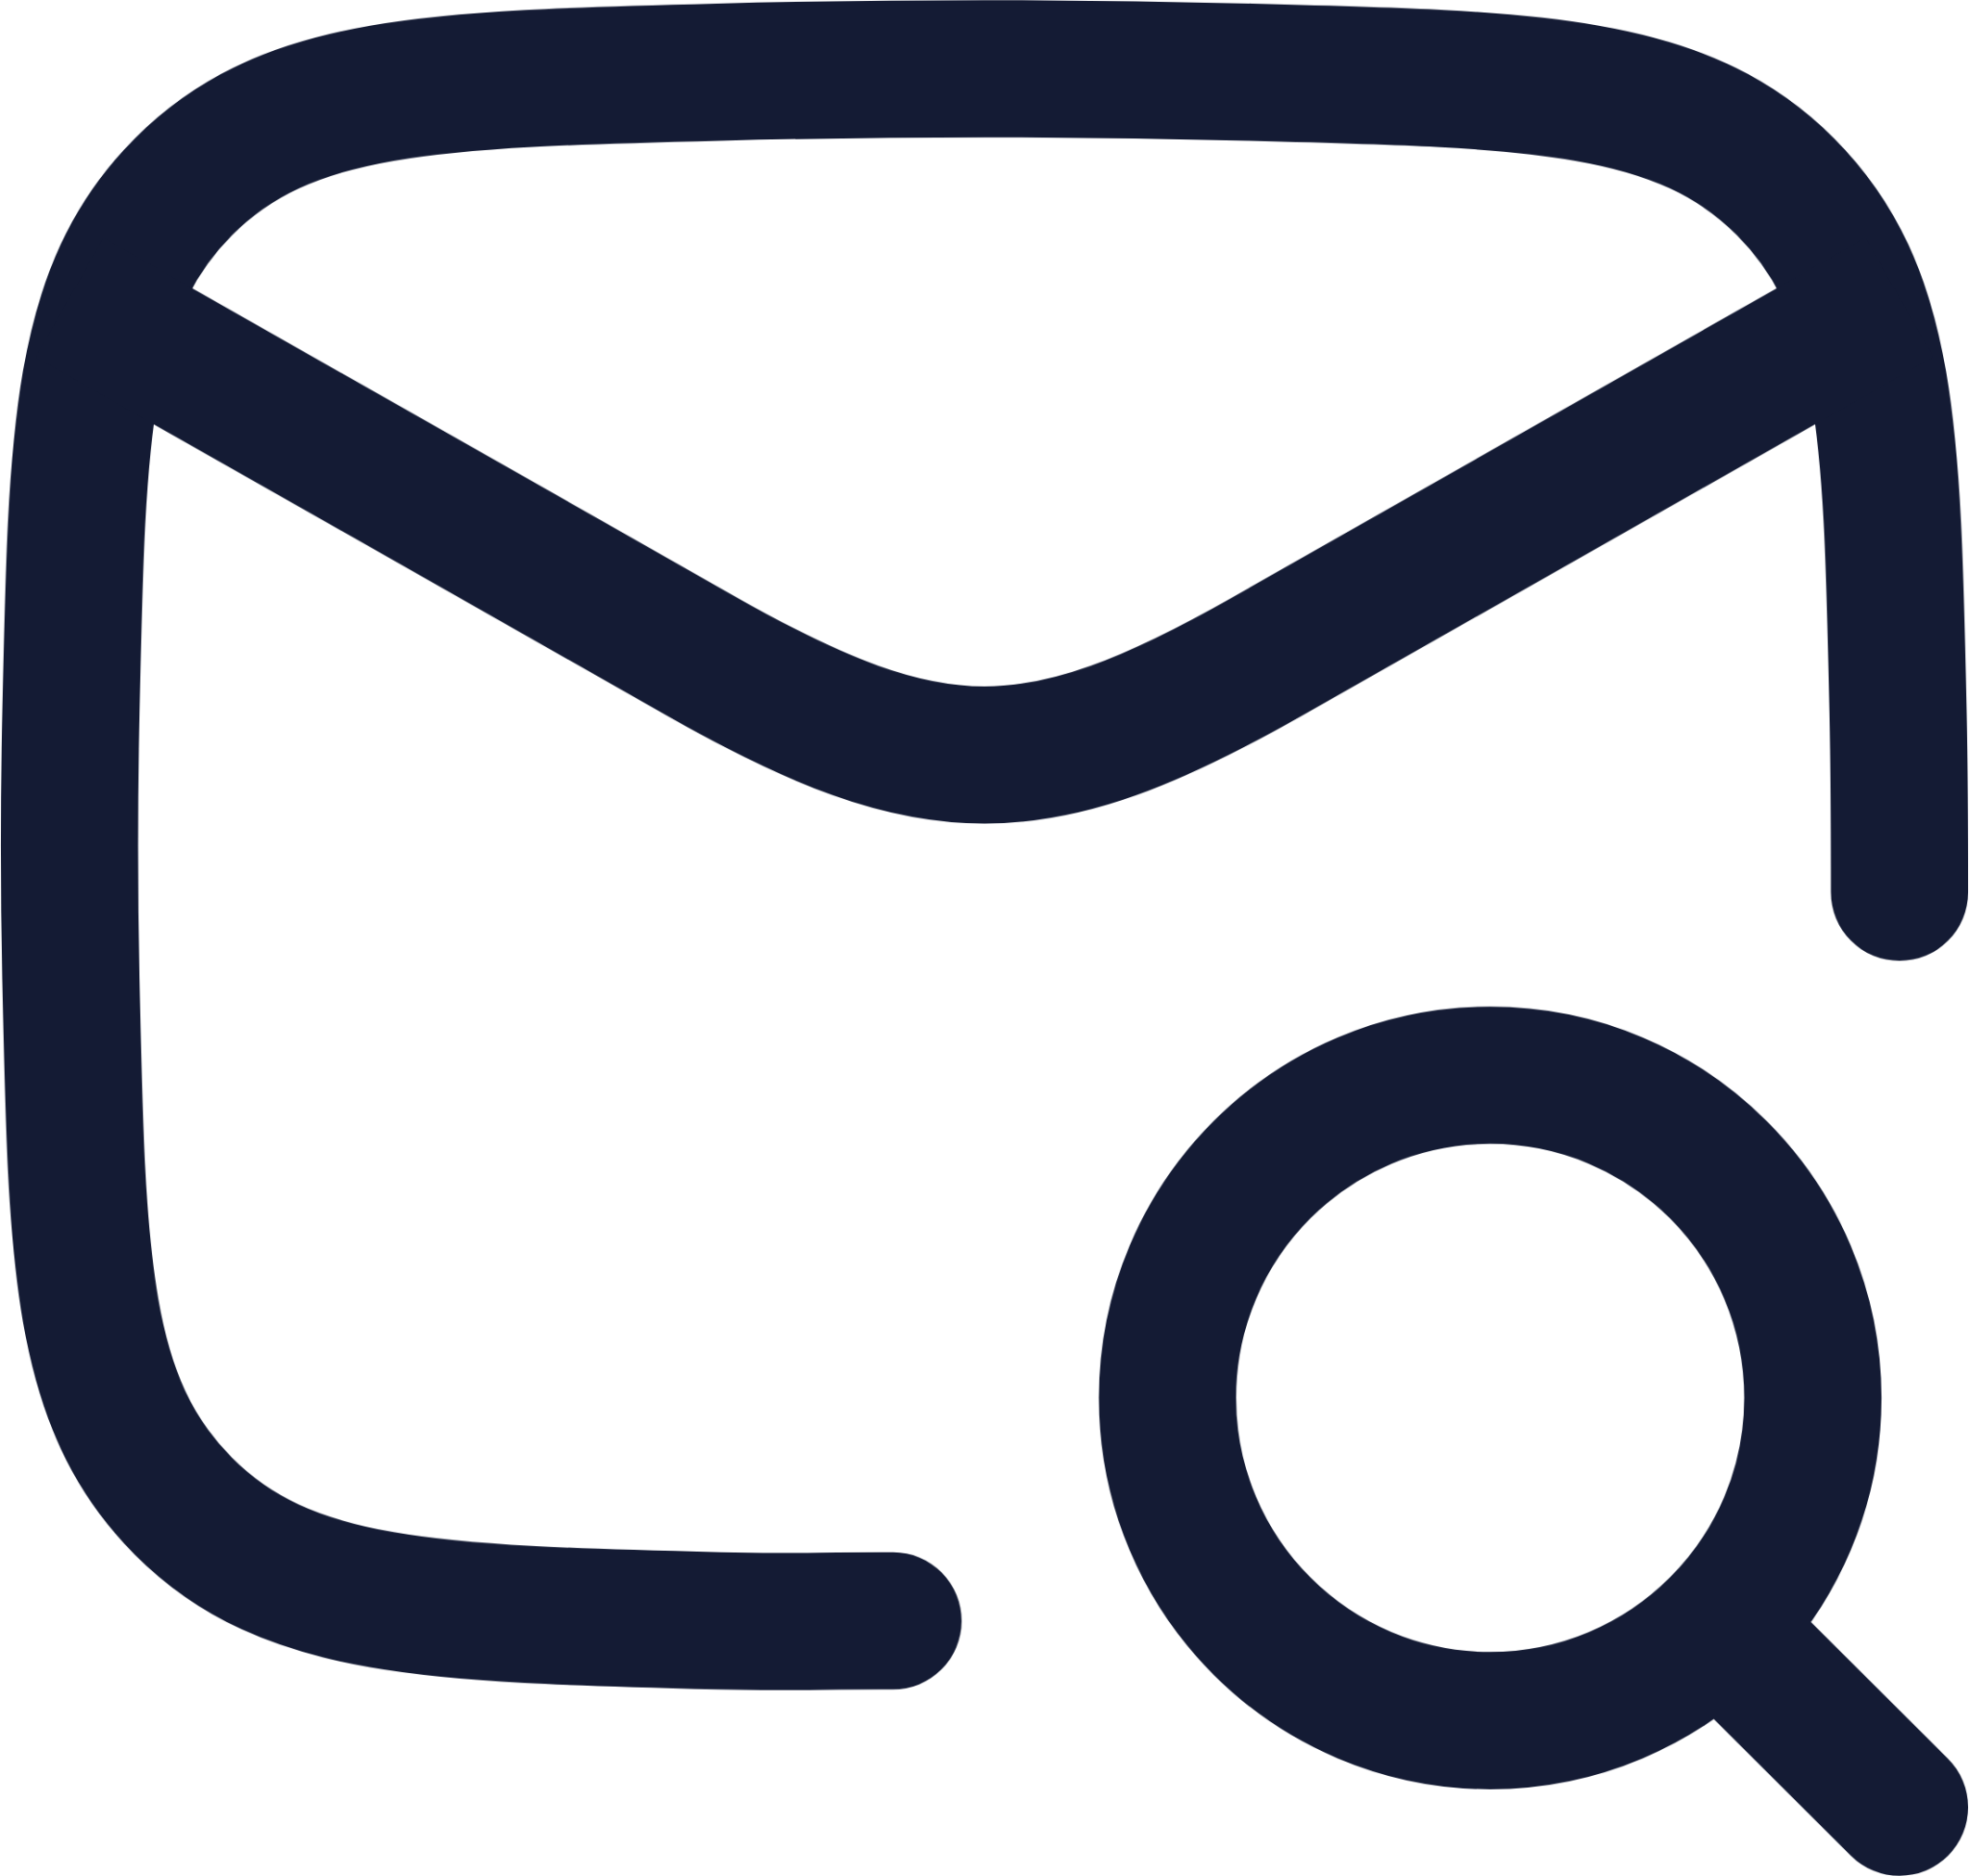 mail search icon